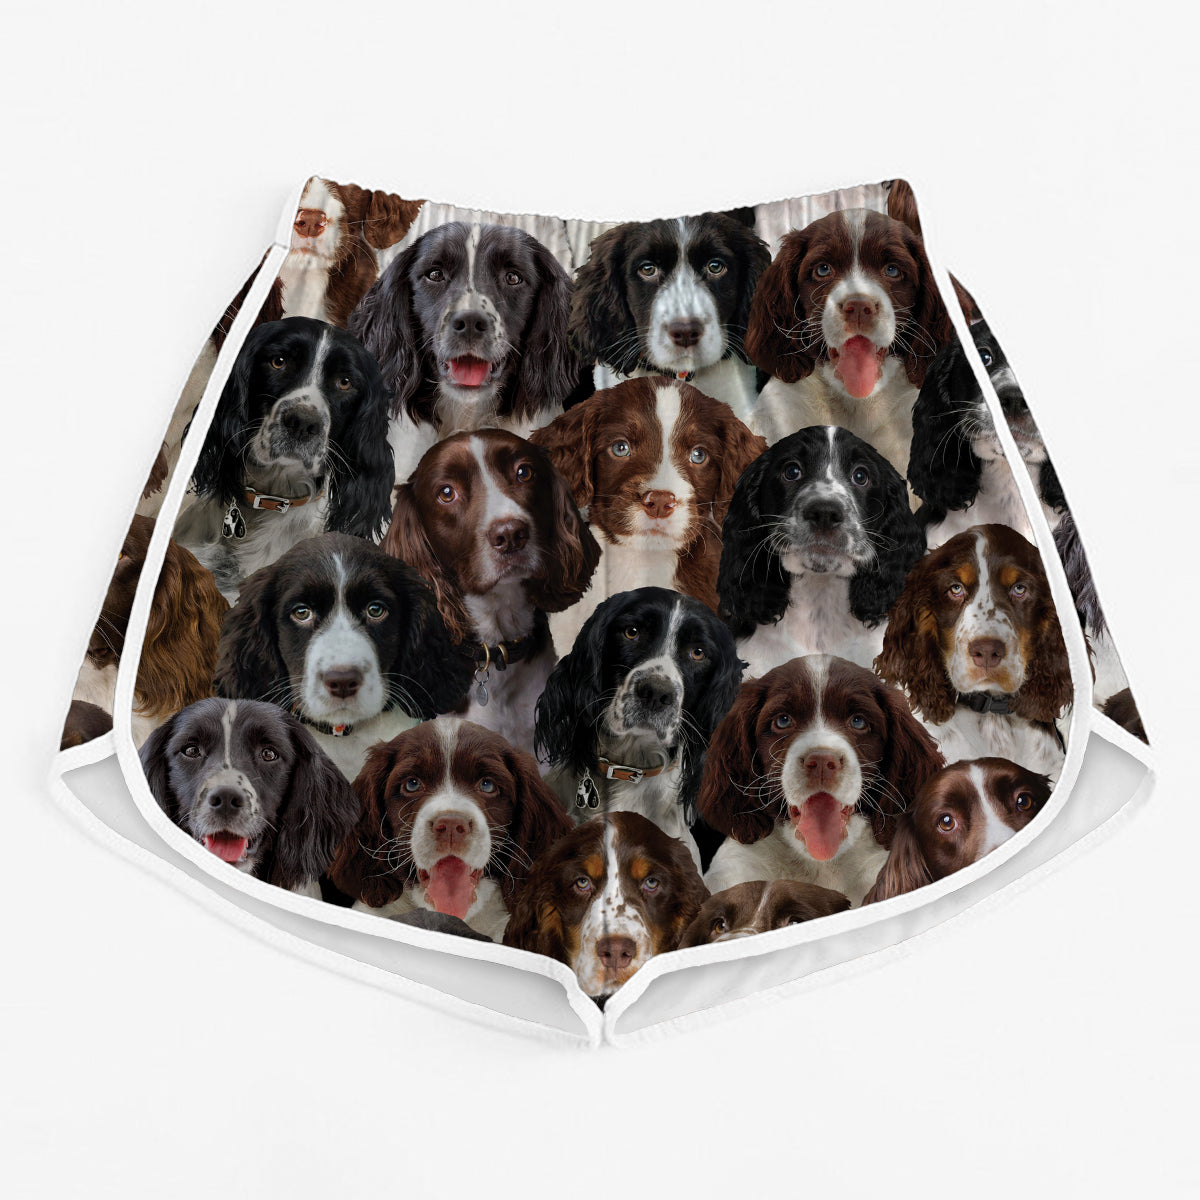 You Will Have A Bunch Of English Springer Spaniels - Women's Running Shorts V1